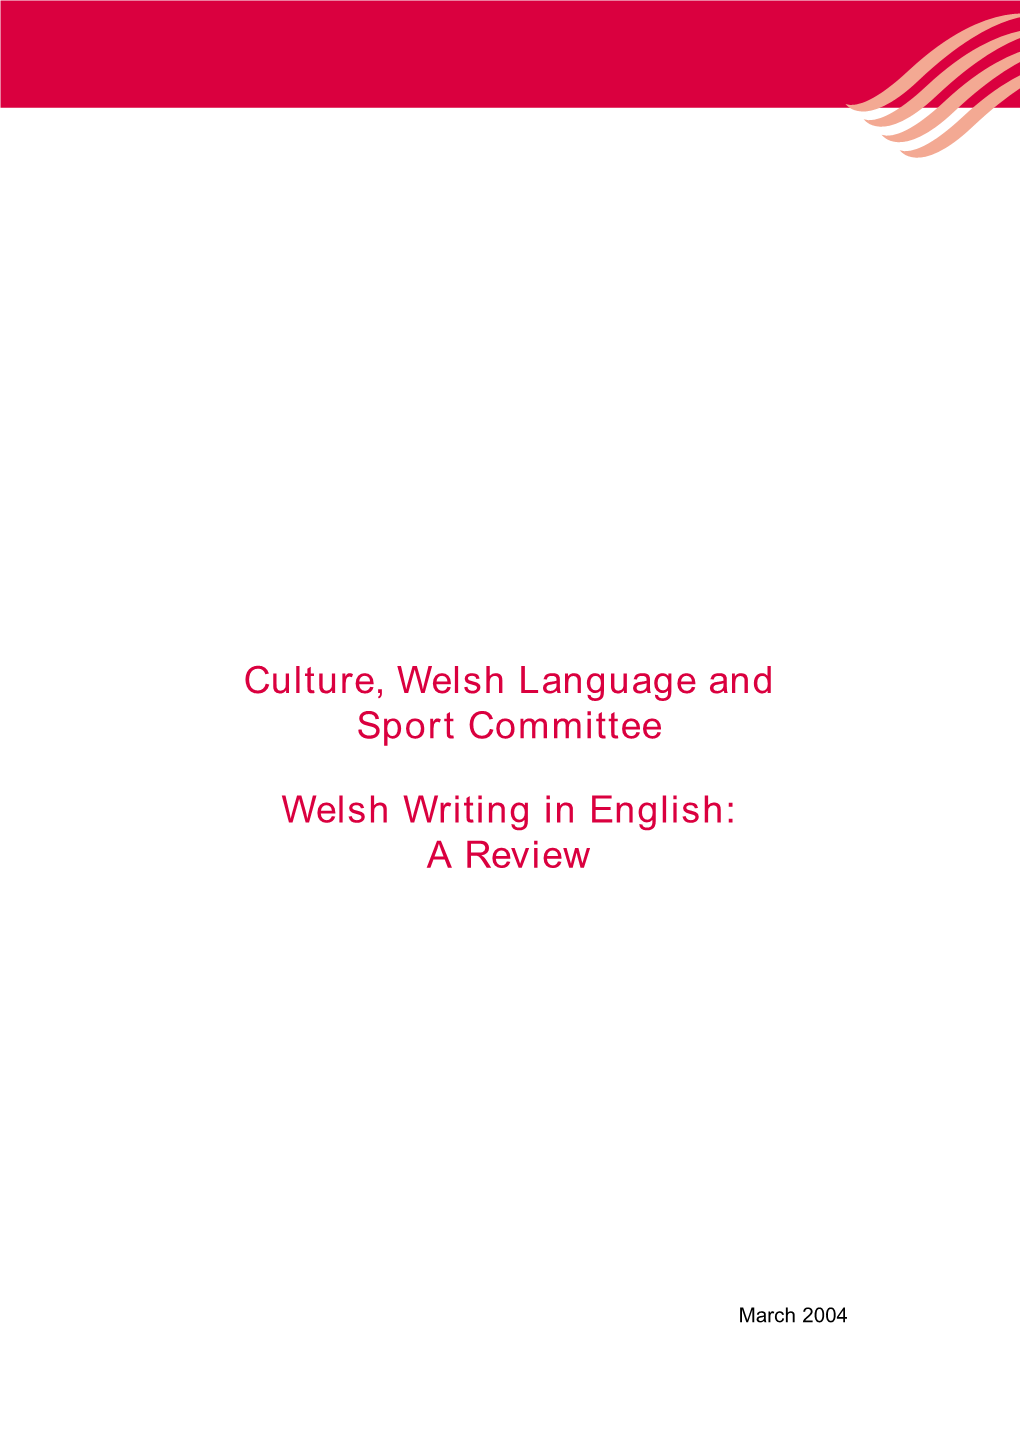 Culture, Welsh Language and Sport Committee Welsh Writing in English